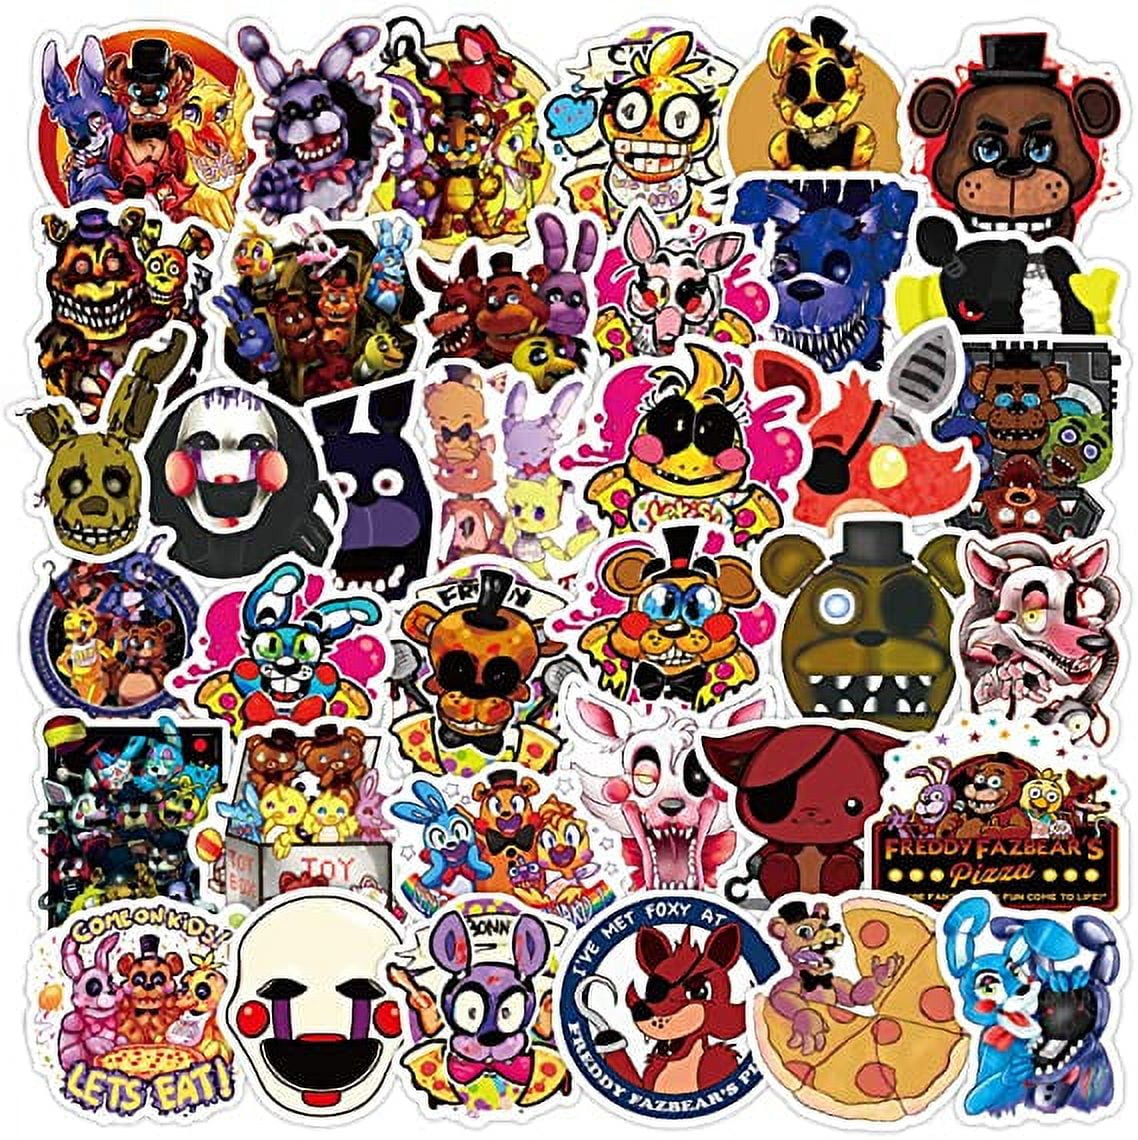 Five Nights at Freddy's Stickers| 50 PCS | Vinyl Waterproof Stickers for  Laptop,Bumper,Skateboard,Water Bottles,Computer,Phone,Terror Game